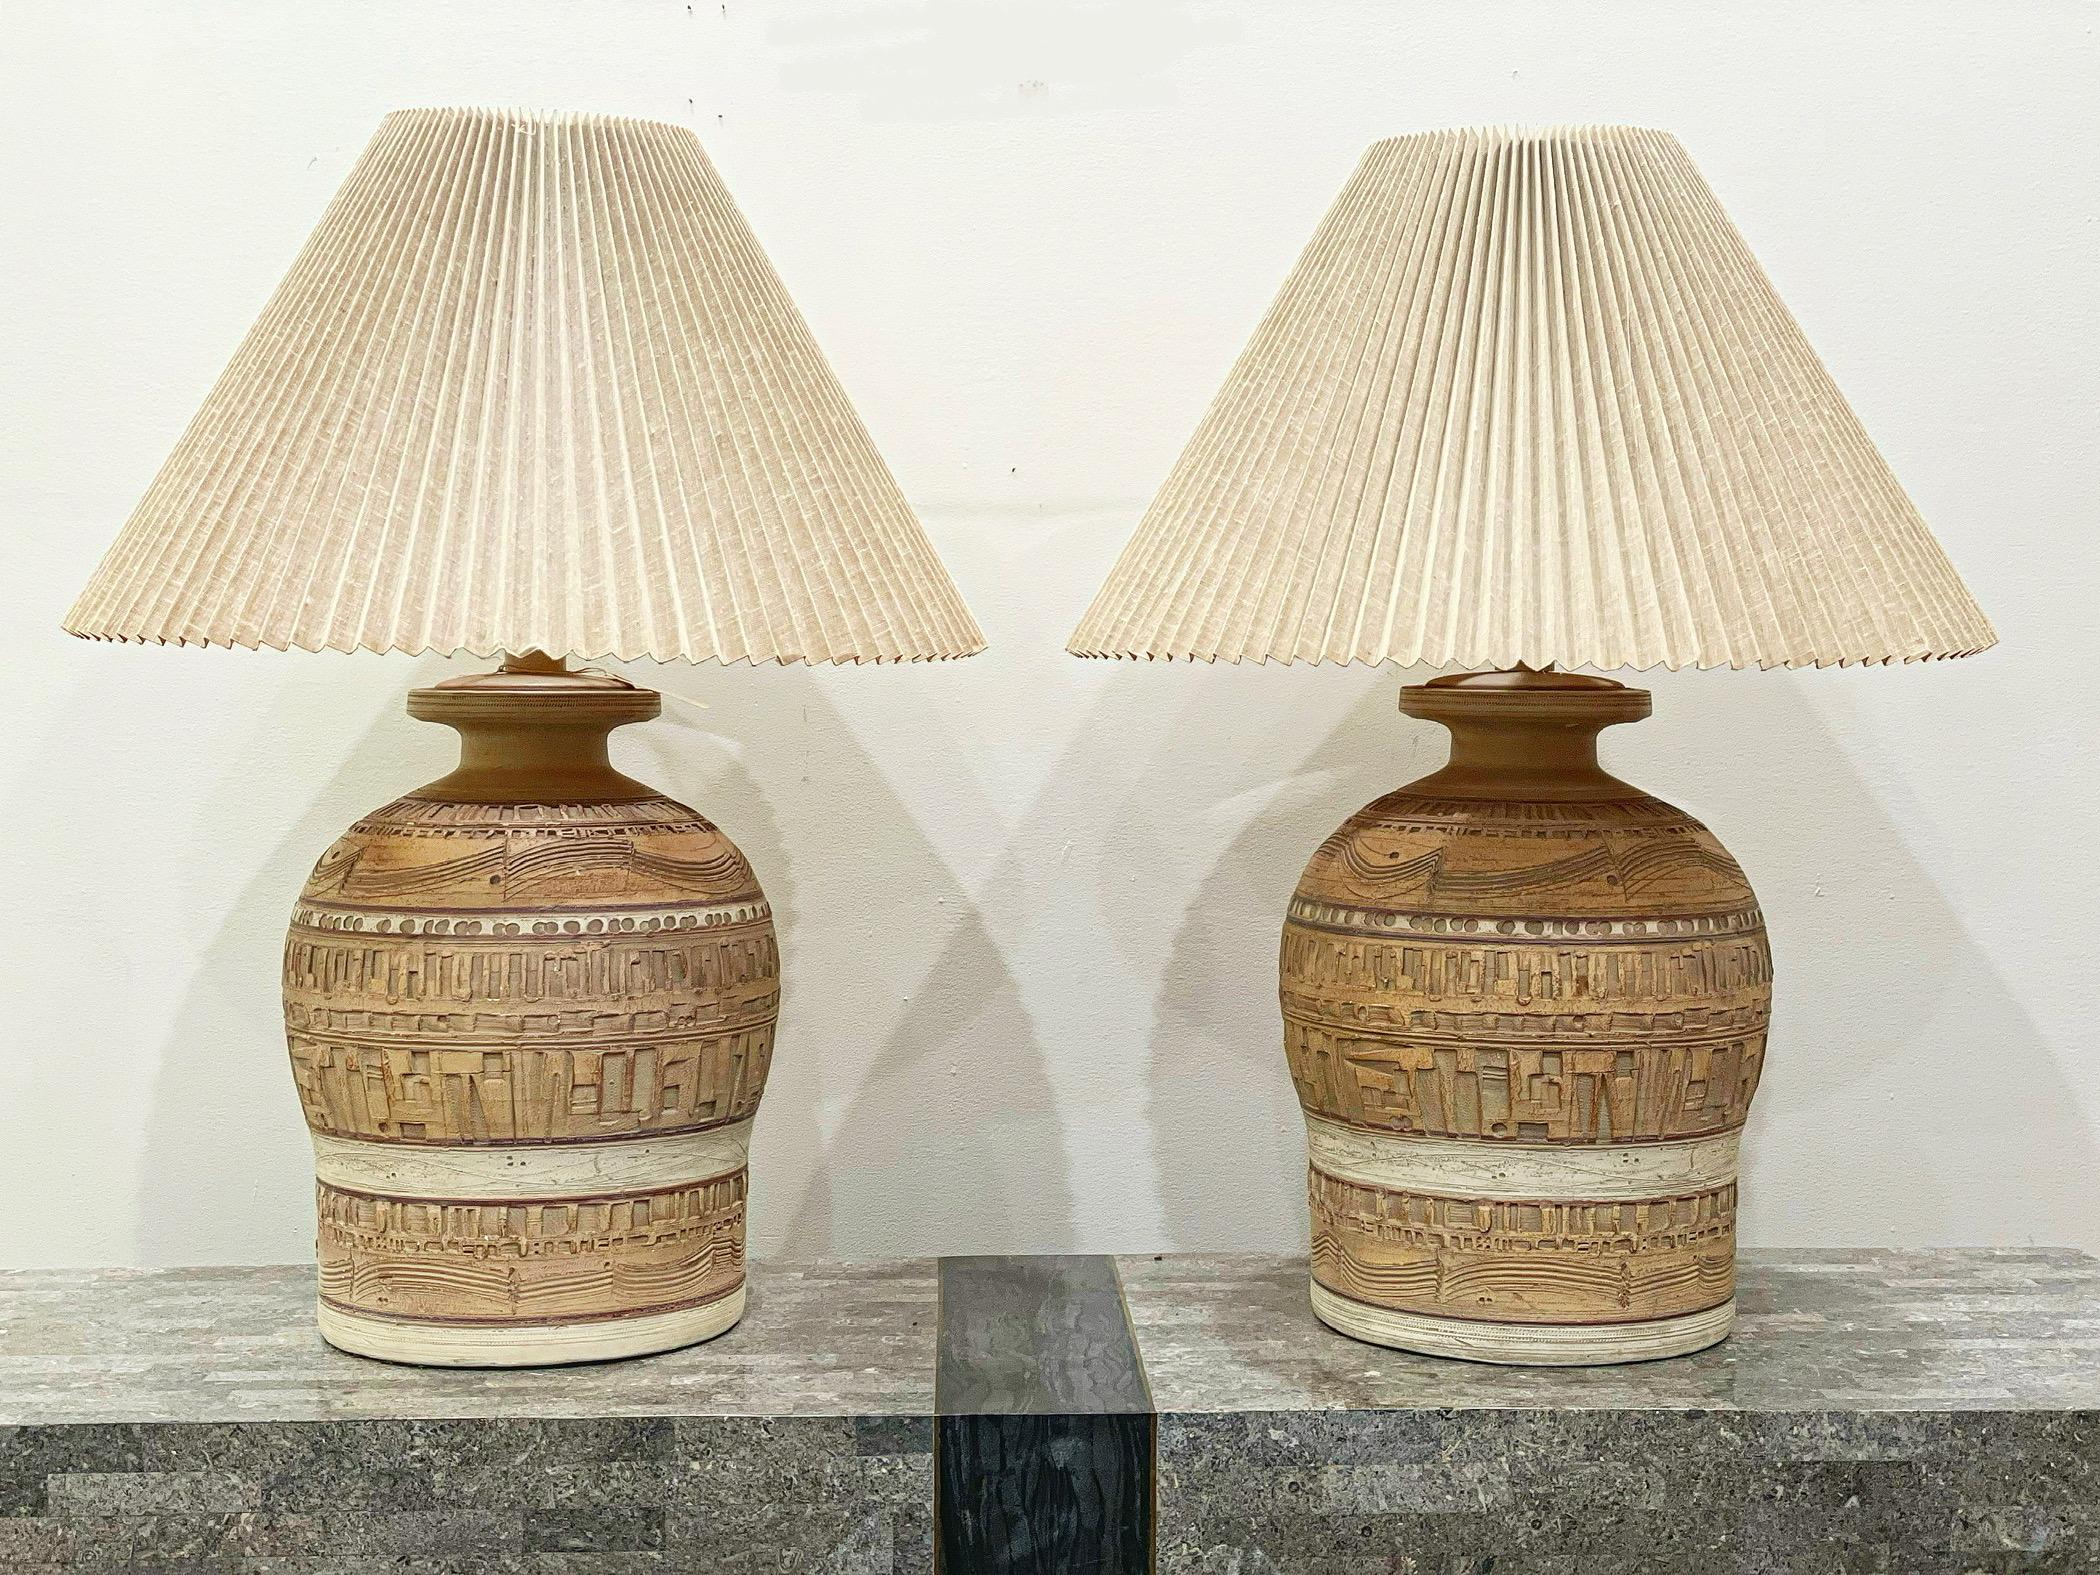 Pair of gorgeous sculpted earthenware ceramic lamps by Casual Lamps of California, circa 1979. Modern organic hand-sculpted motif with muted desert tones of taupes and beiges with hints of rustic pinks. Each is signed 